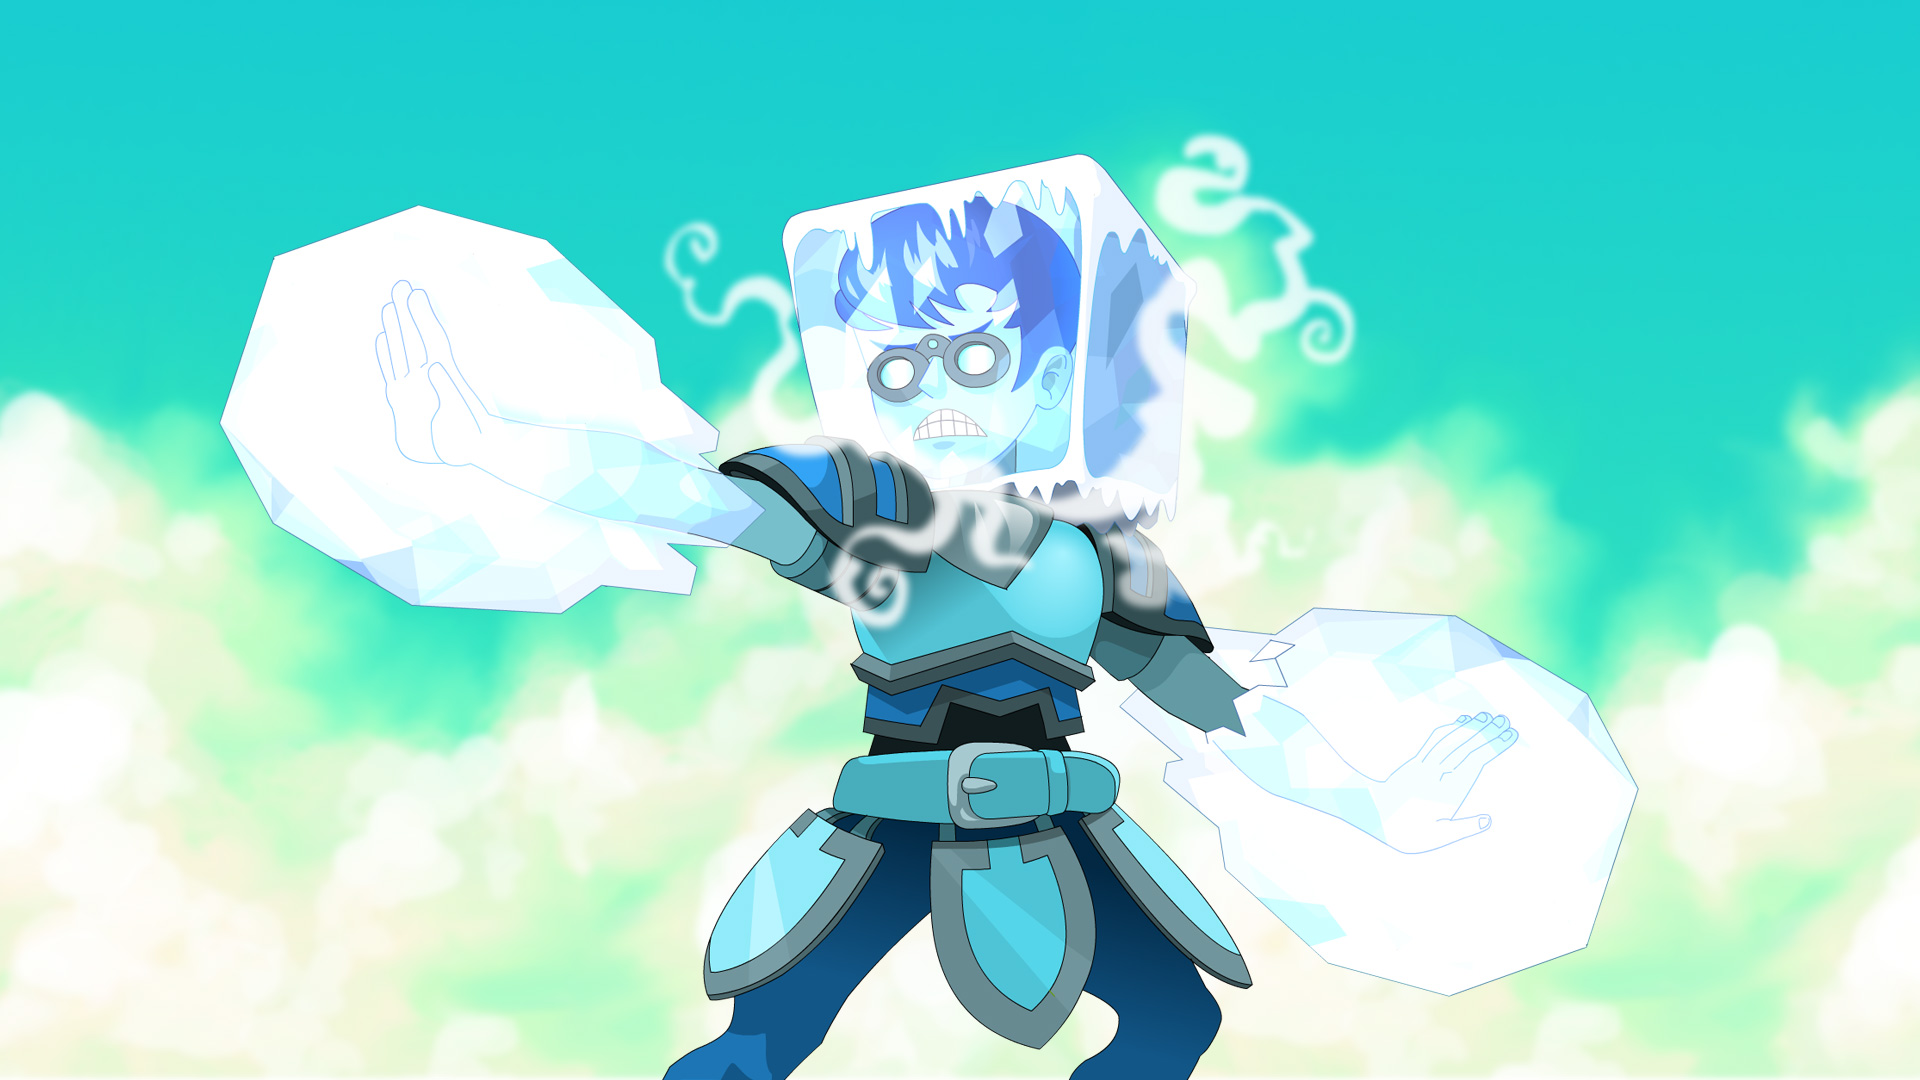 clicker-heroes-referi-jerator-ice-wizard-steam-trading-cards-wiki